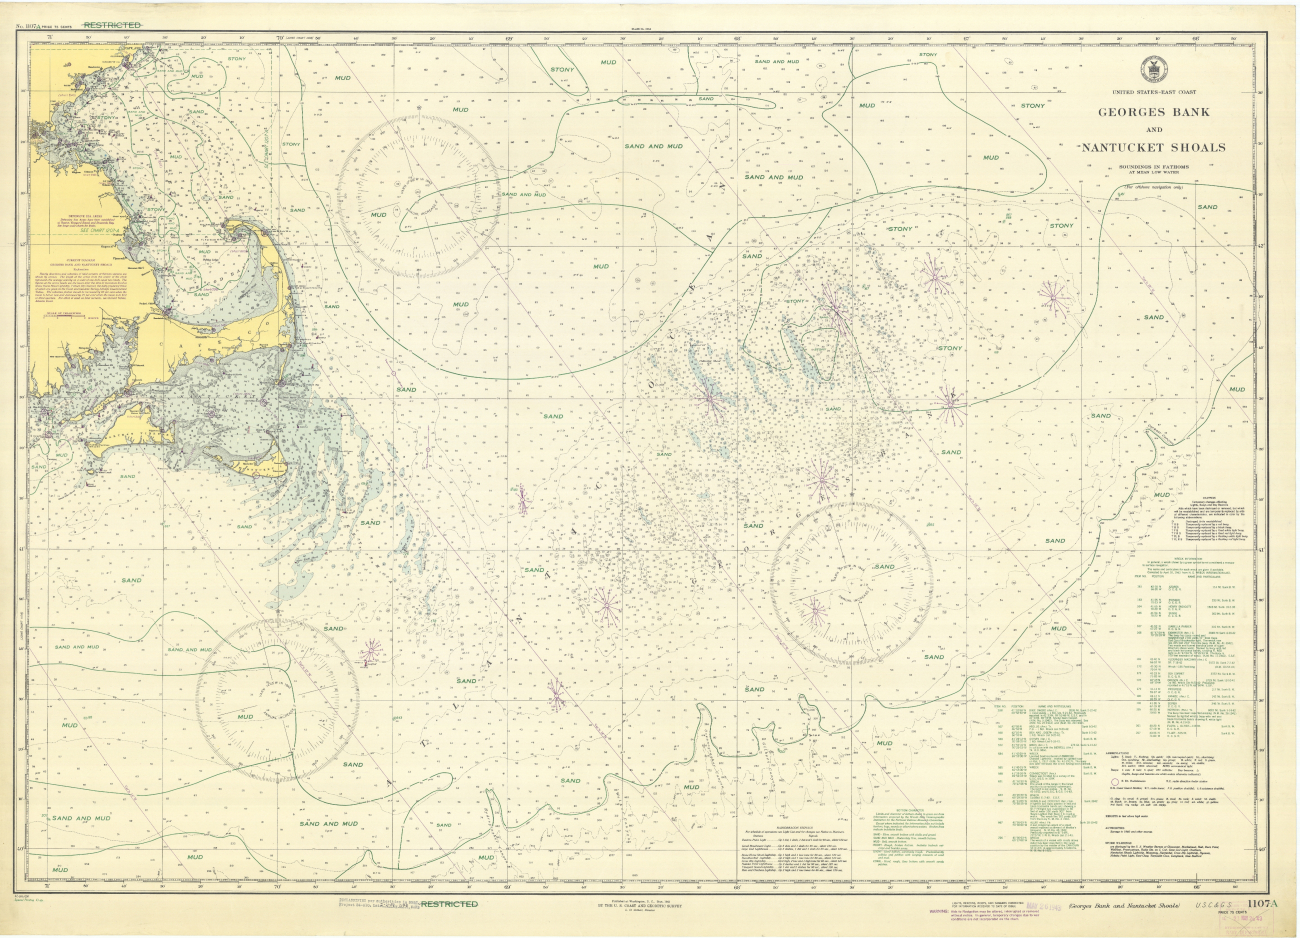 Shipwreck chart showing location of sunken wrecks for use by surface warfarevessels engaged in anti-submarine warfare